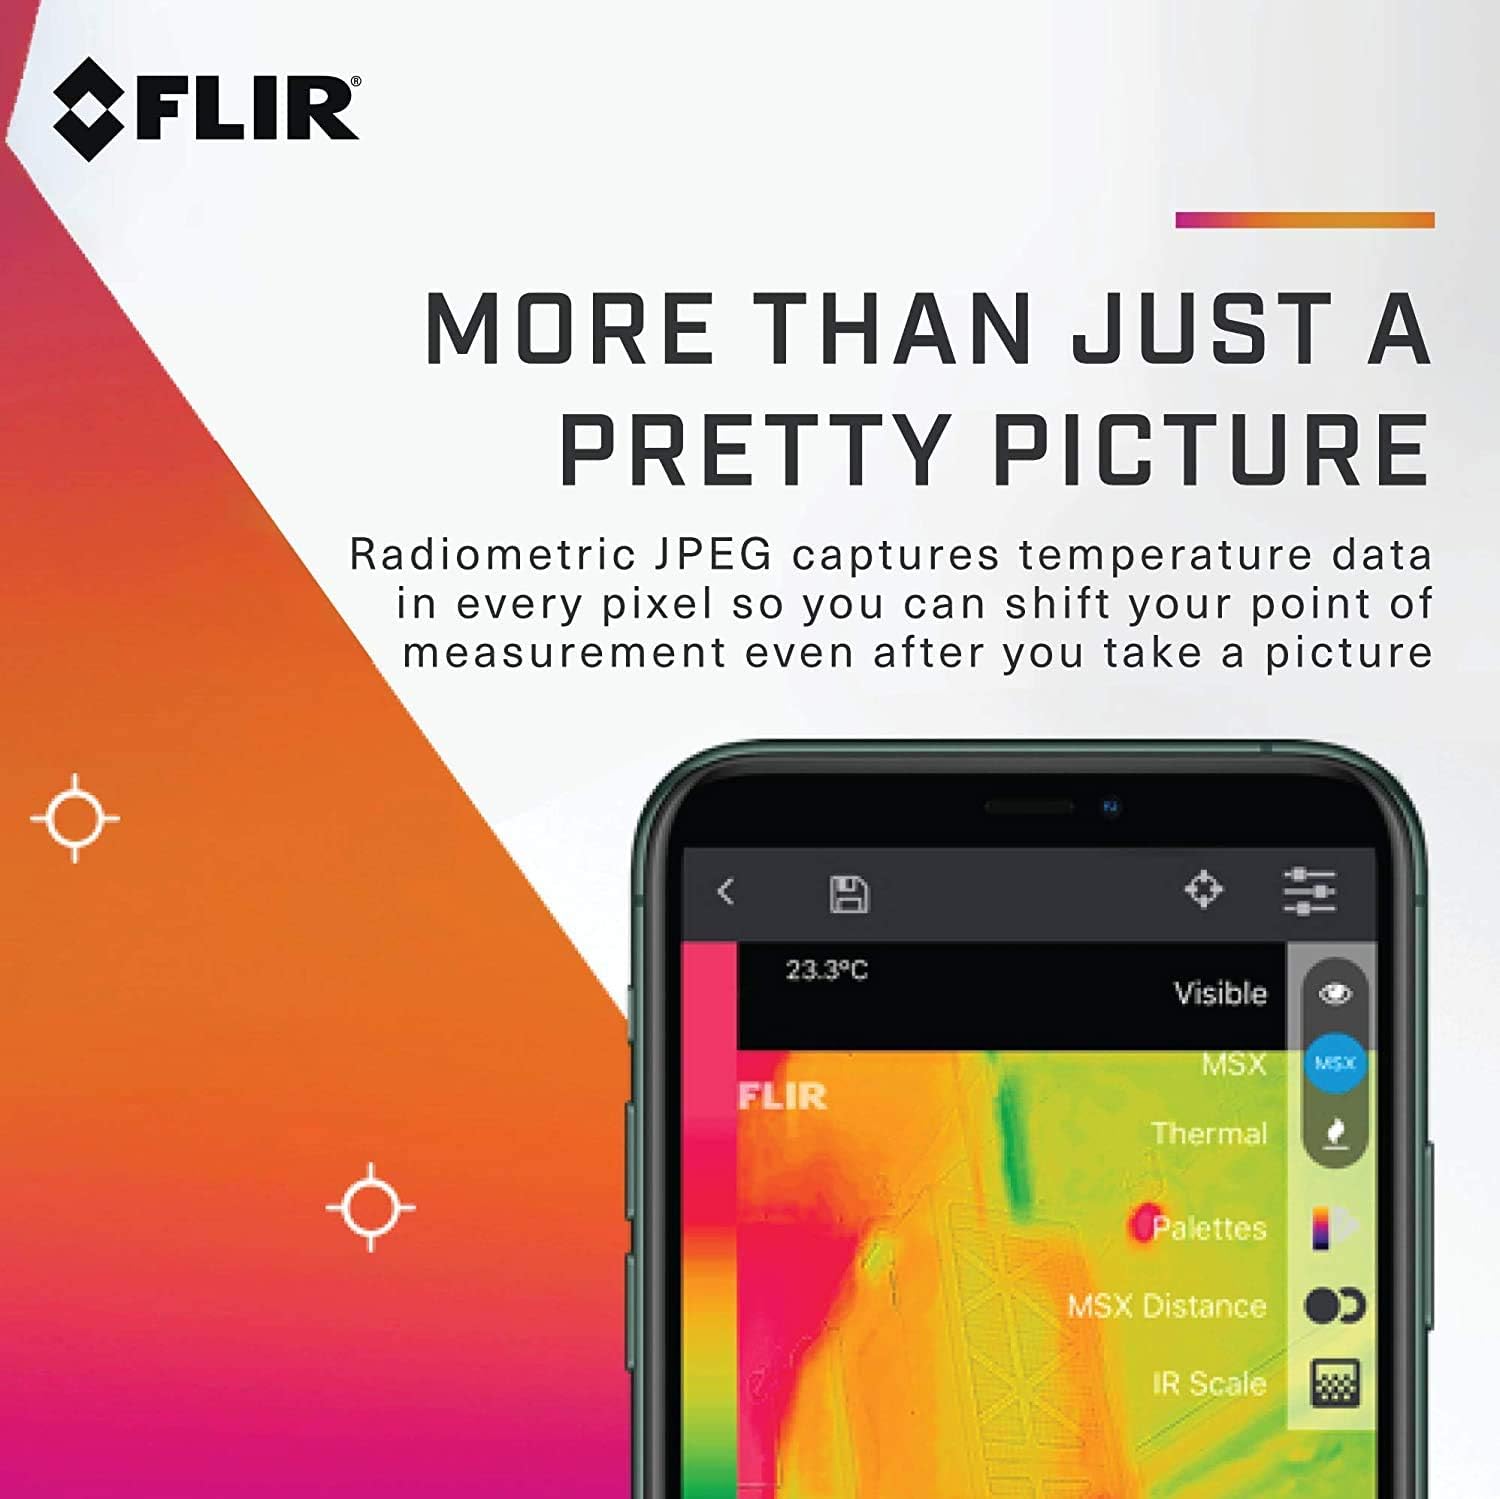 FLIR ONE Gen 3  iOS  Thermal Camera for Smart Phones  wit - New York - Albany ID1554469 2